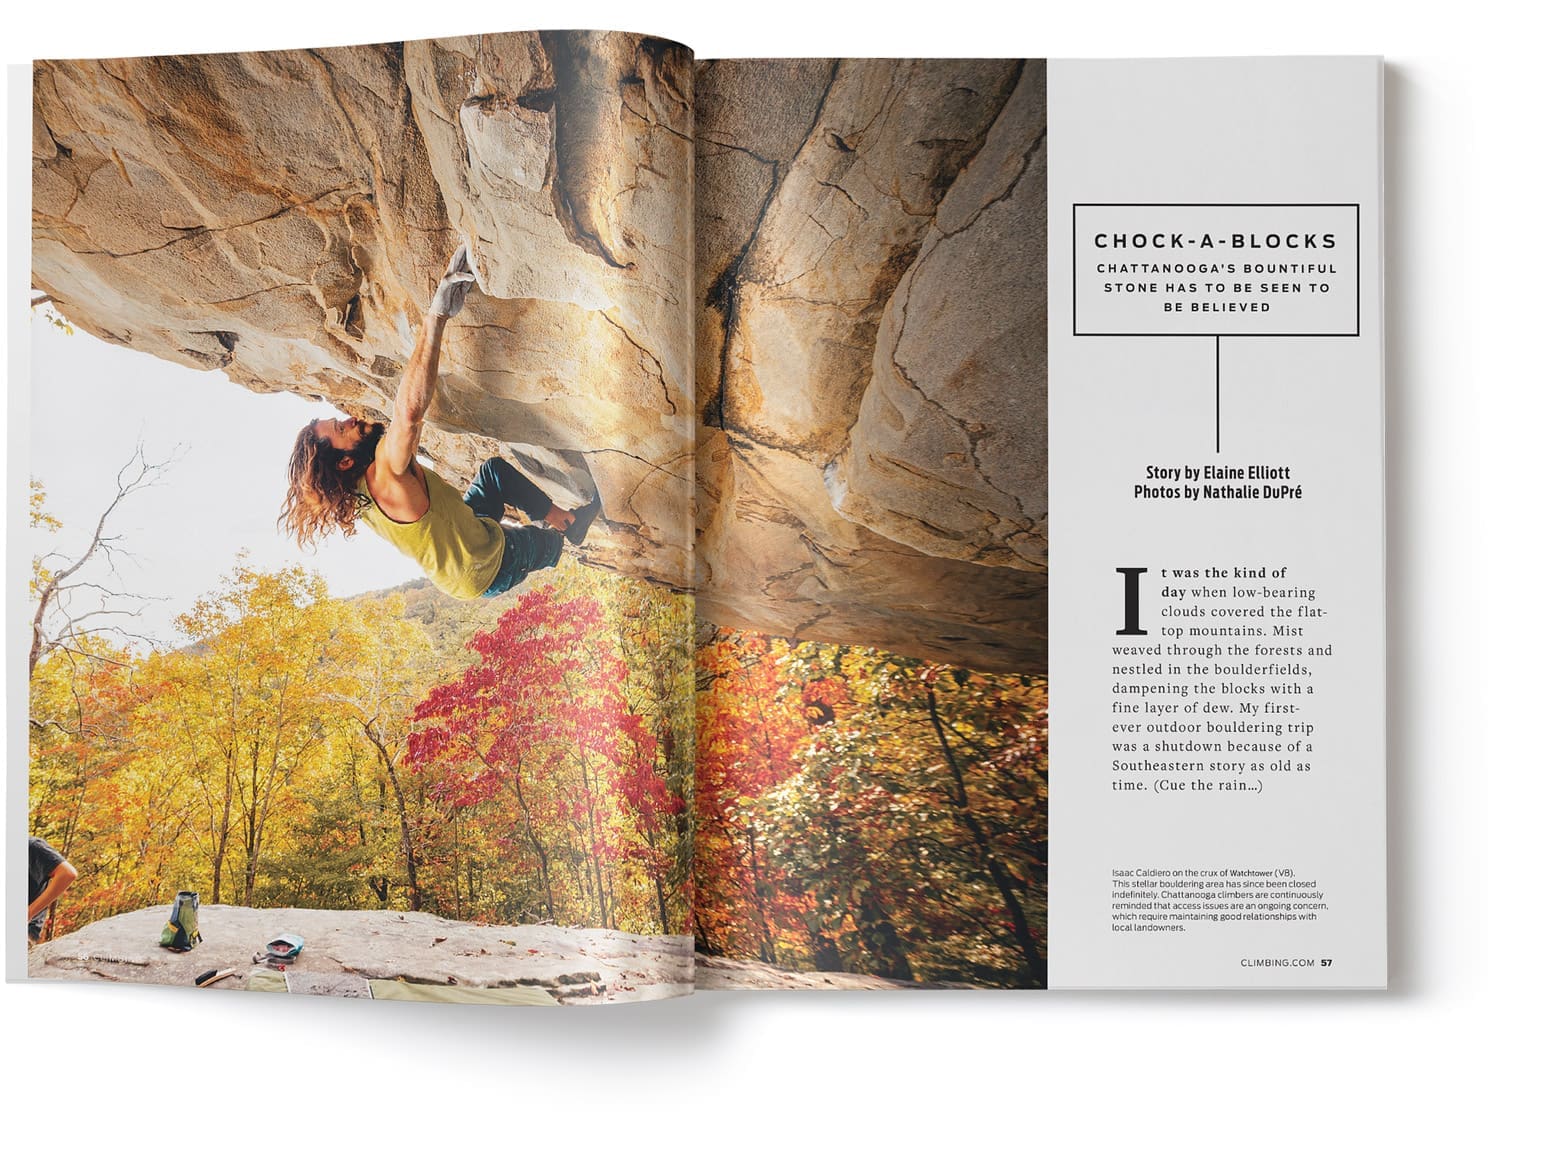 A magazine page showing a man rock-climbing against an autumn backdrop. The story is by Elaine Elliott and photos by Nathalie DuPré.